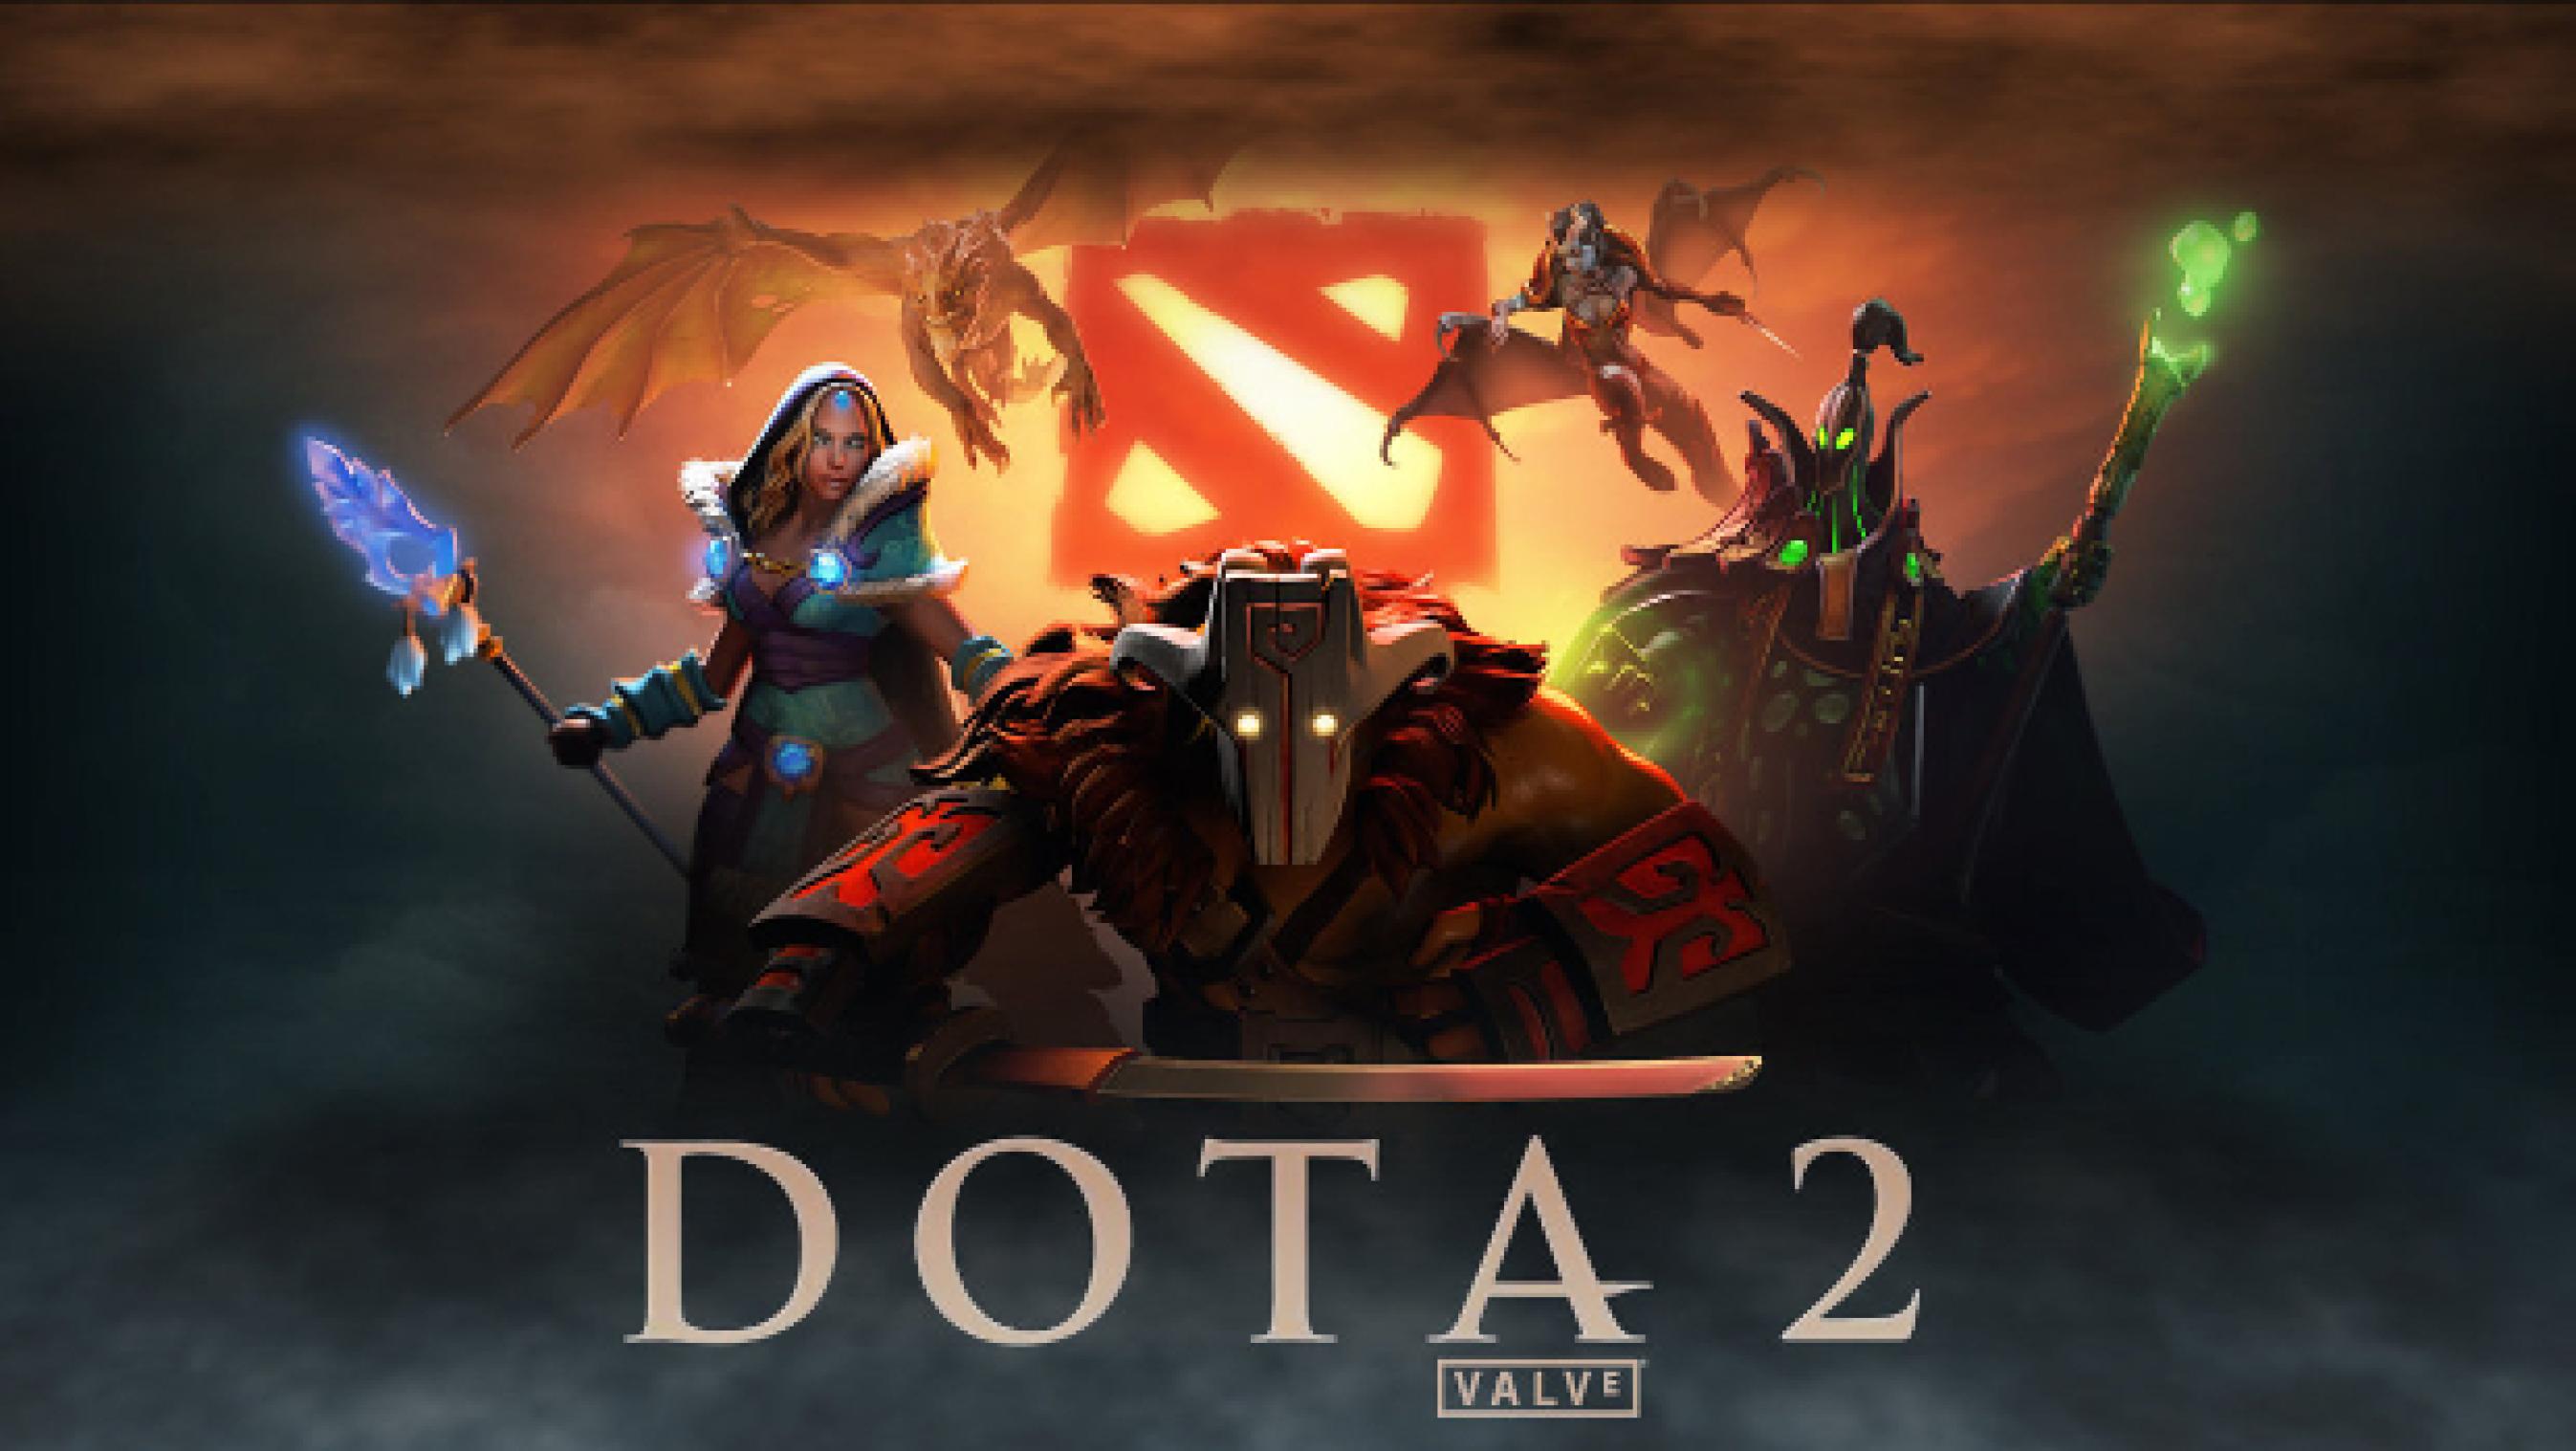 Dota 2 is one of the most popular games in the world, image via Valve